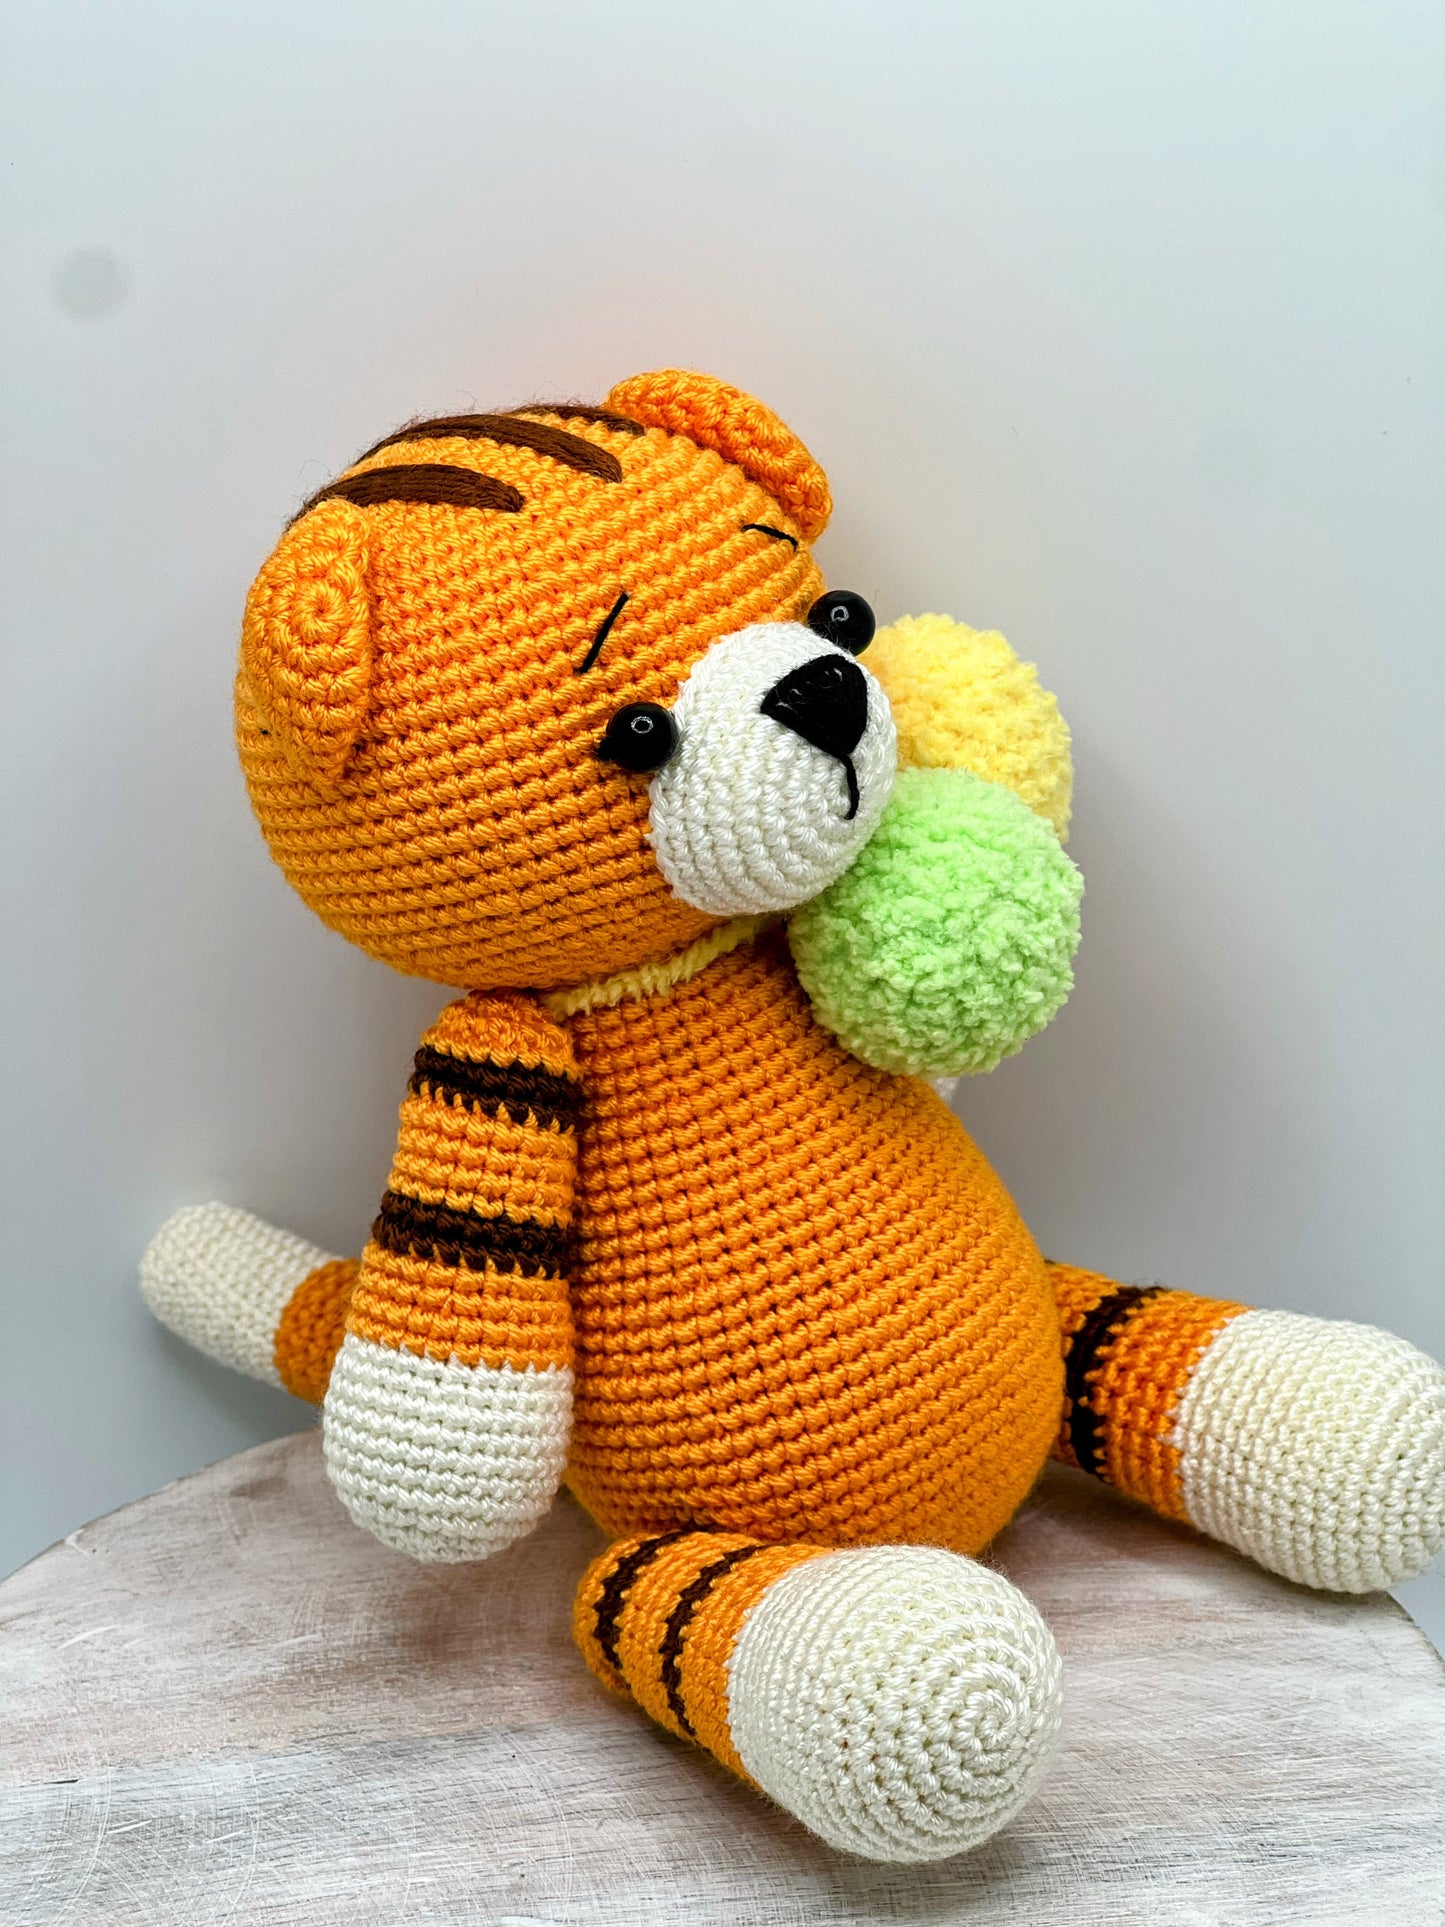 Stuffed Tigger Toy With Moving Legs - Crochet Knitted Amigurumi Toy